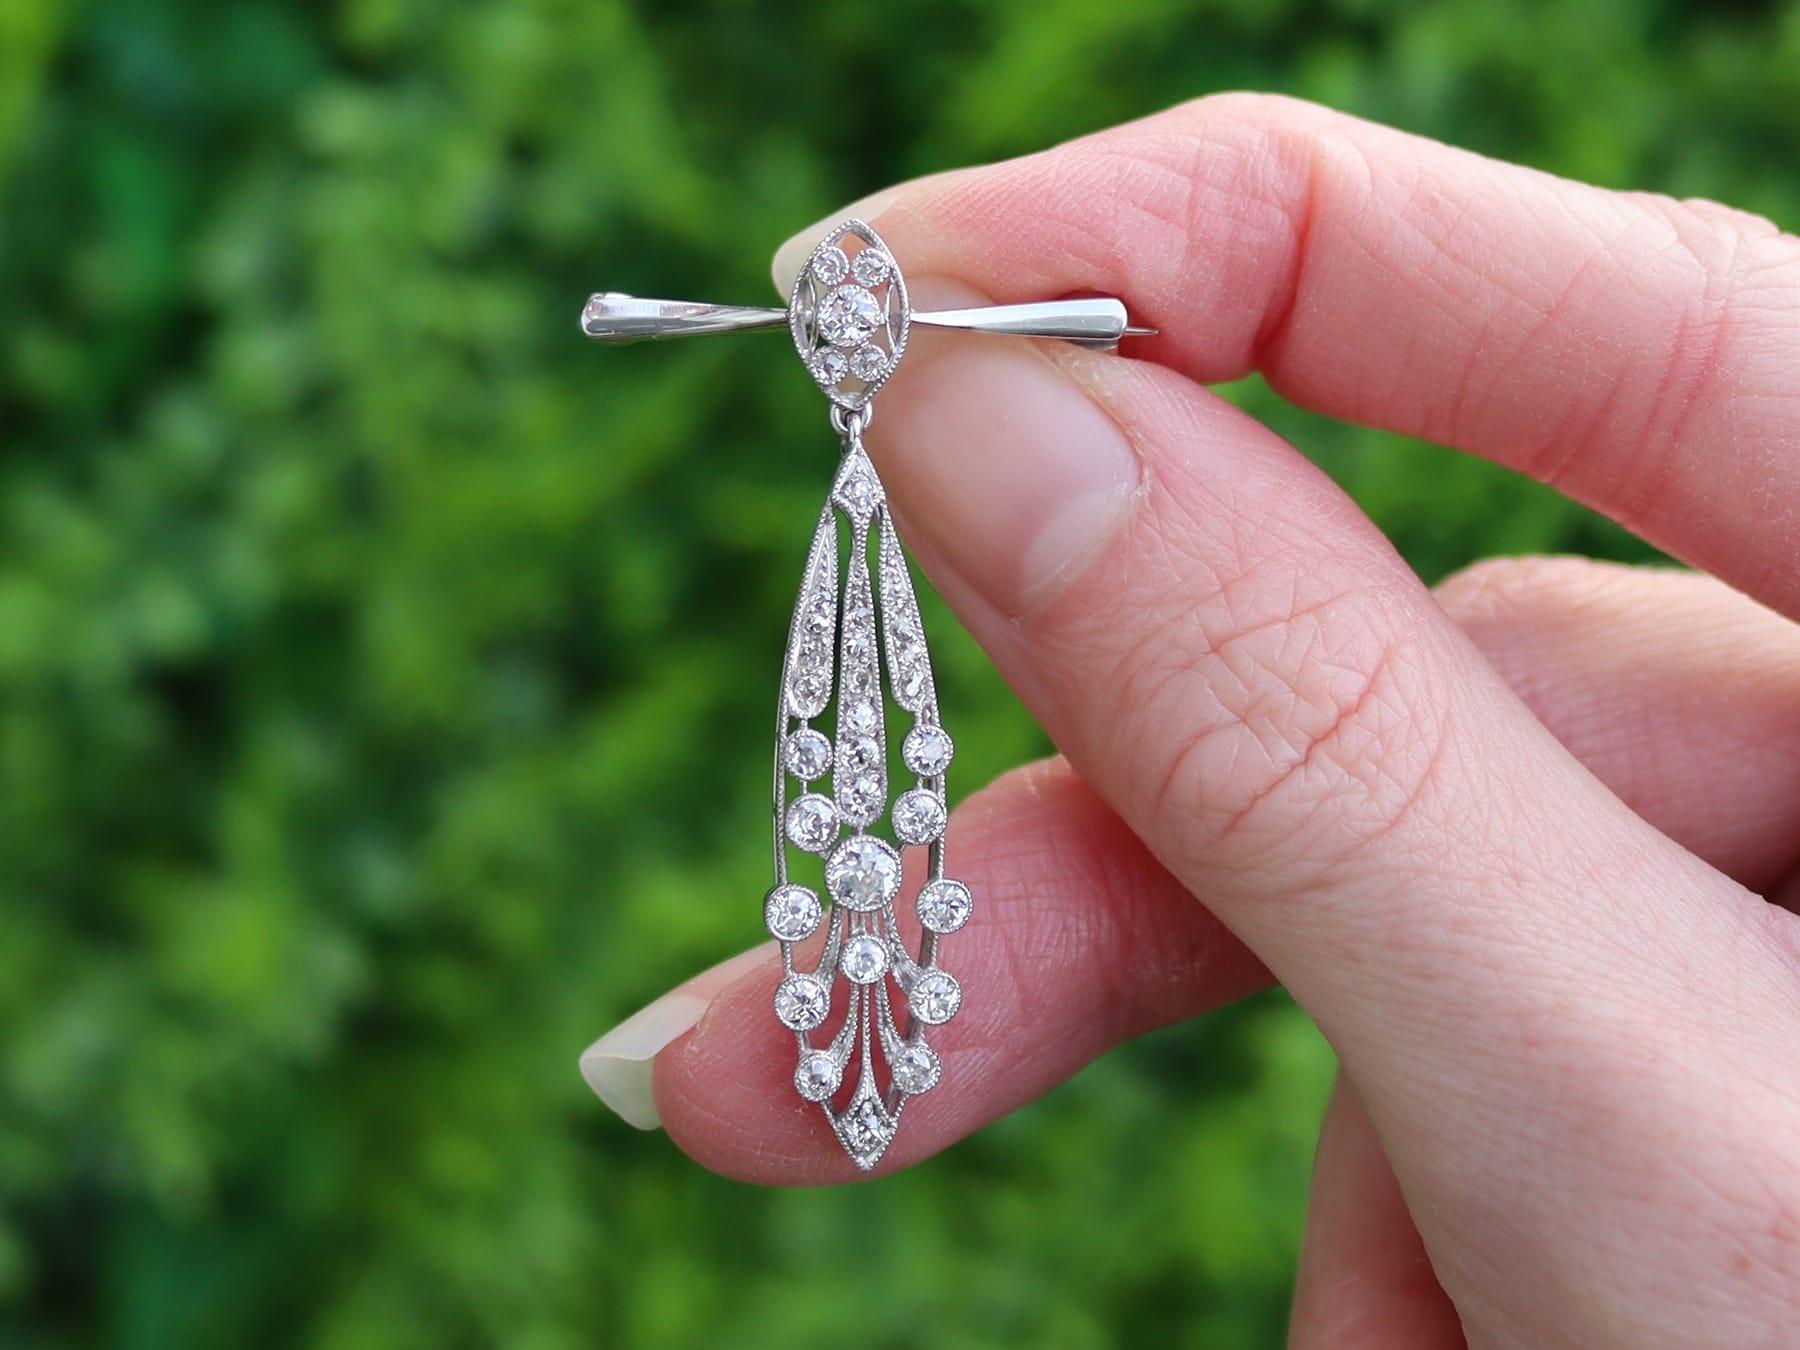 A fine and impressive antique 1920's 1.38 carat diamond, platinum and 15 karat white gold drop brooch; part of our diverse antique 1920s diamond jewelry collections.

This fine and impressive antique diamond lapel brooch has been crafted in platinum